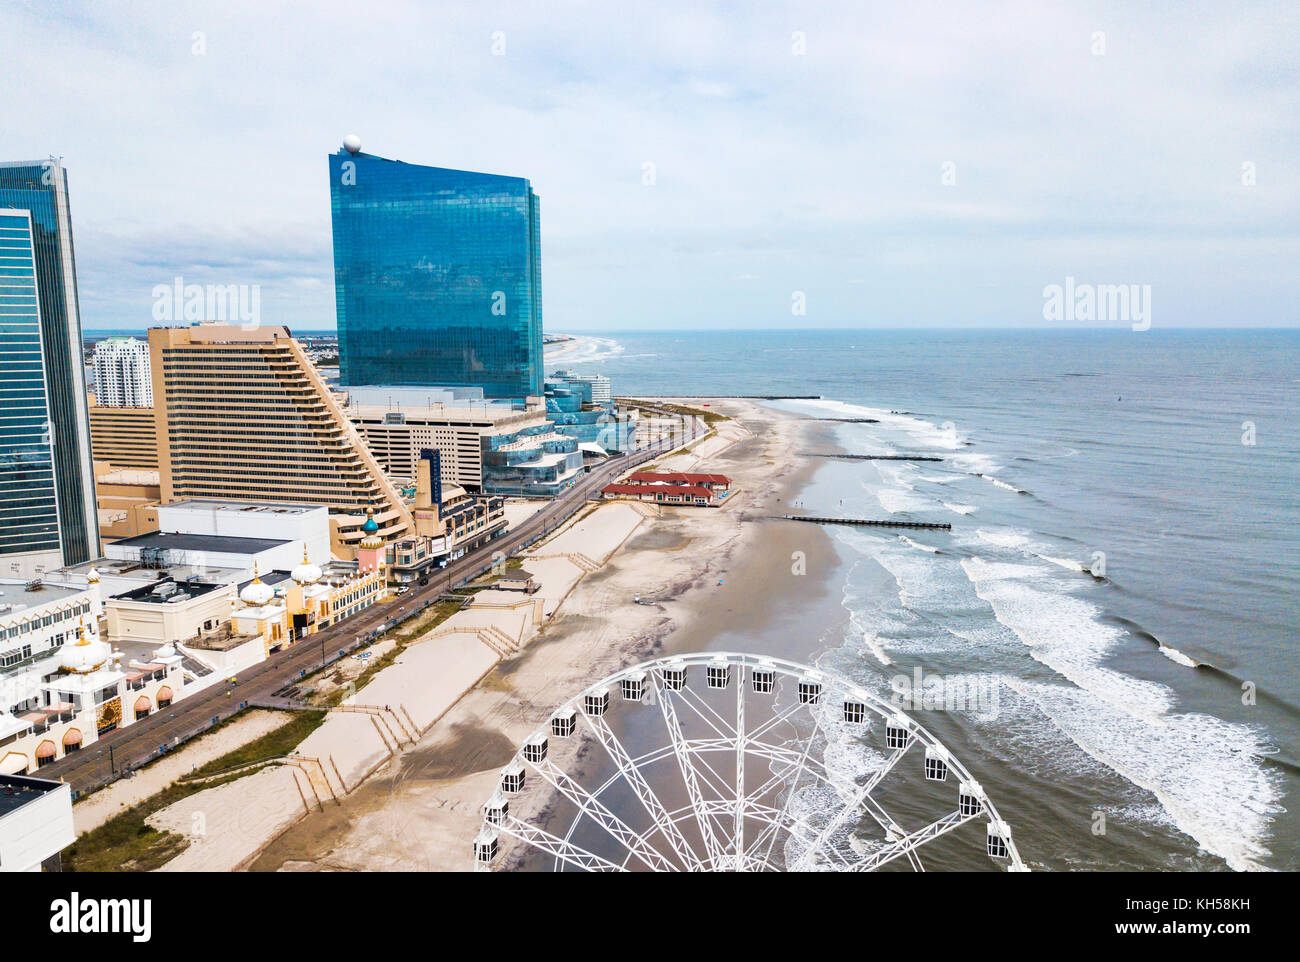 Atlantic city waterline aerial view. AC is a tourist city in New Jersey famous for its casinos, boardwalks, and beaches Stock Photo